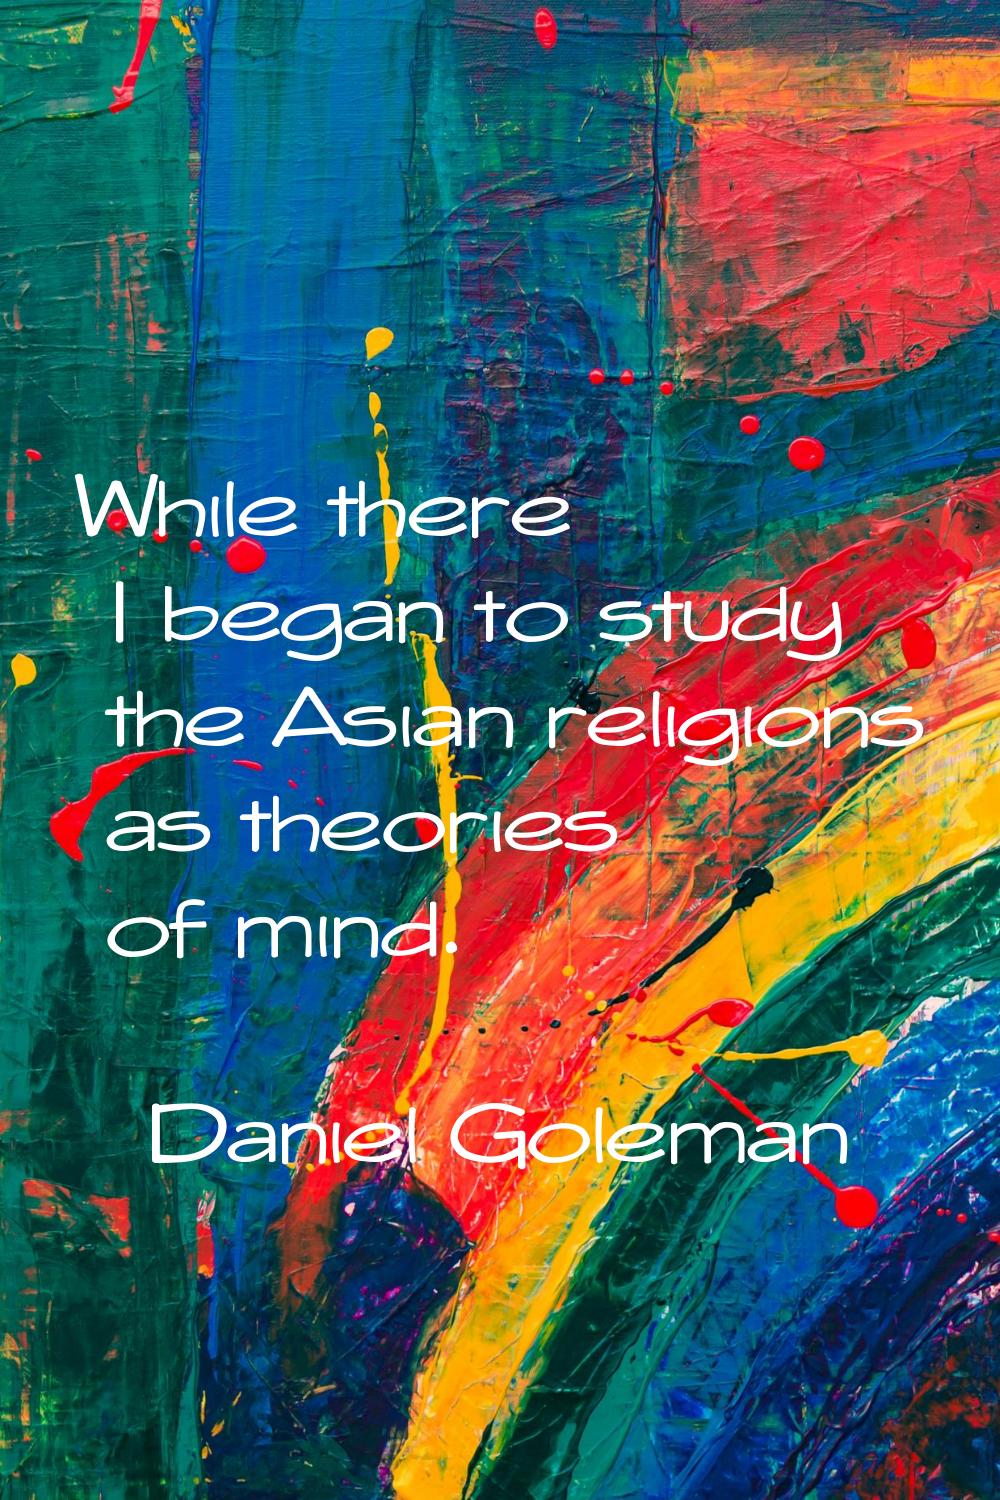 While there I began to study the Asian religions as theories of mind.